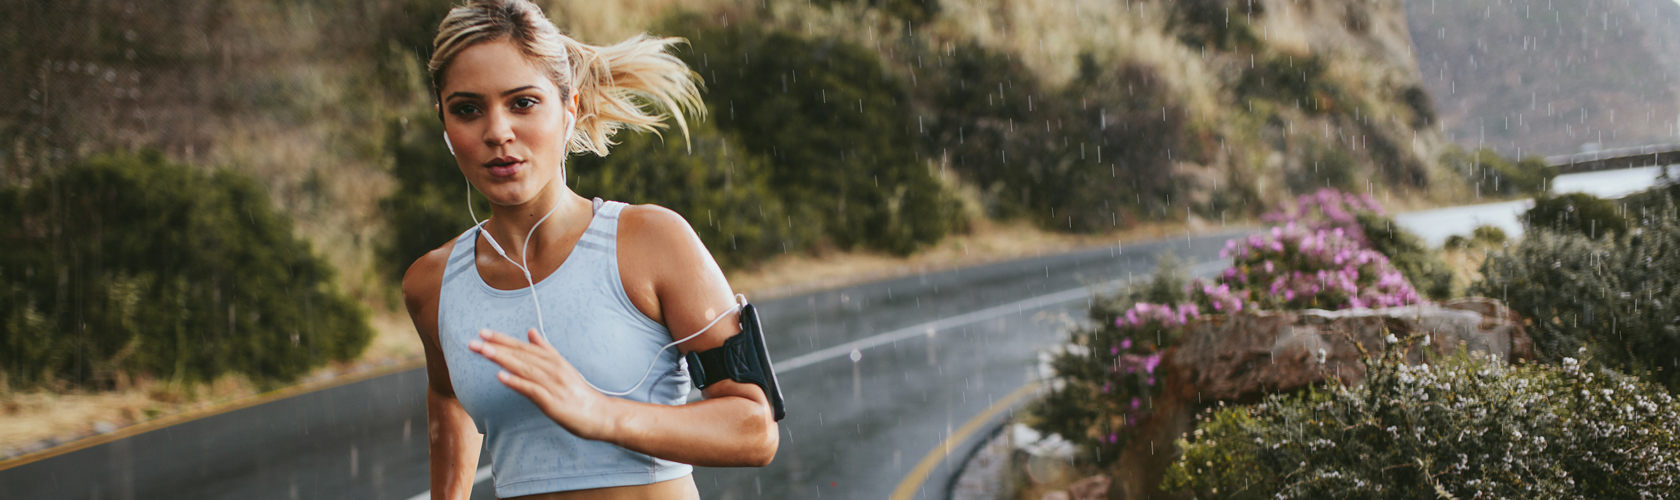 Does Listening to Music on Your Run Affect Your Pace?